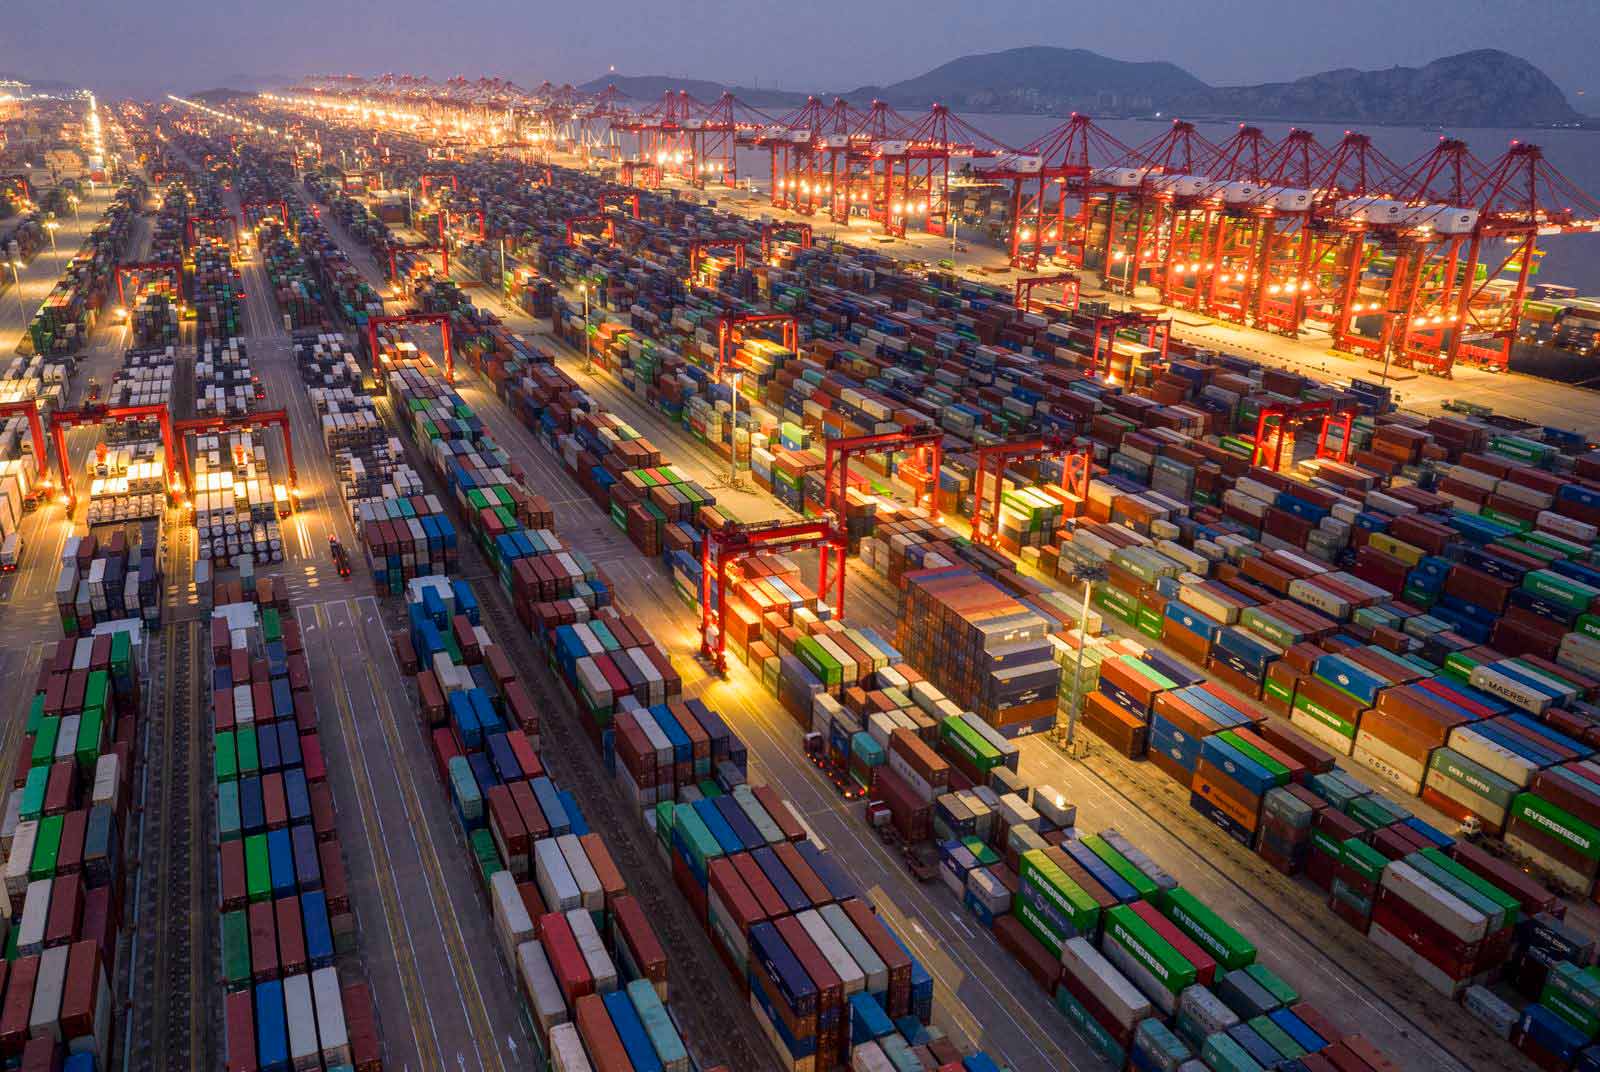 China under lockdown: The global supply chain crisis